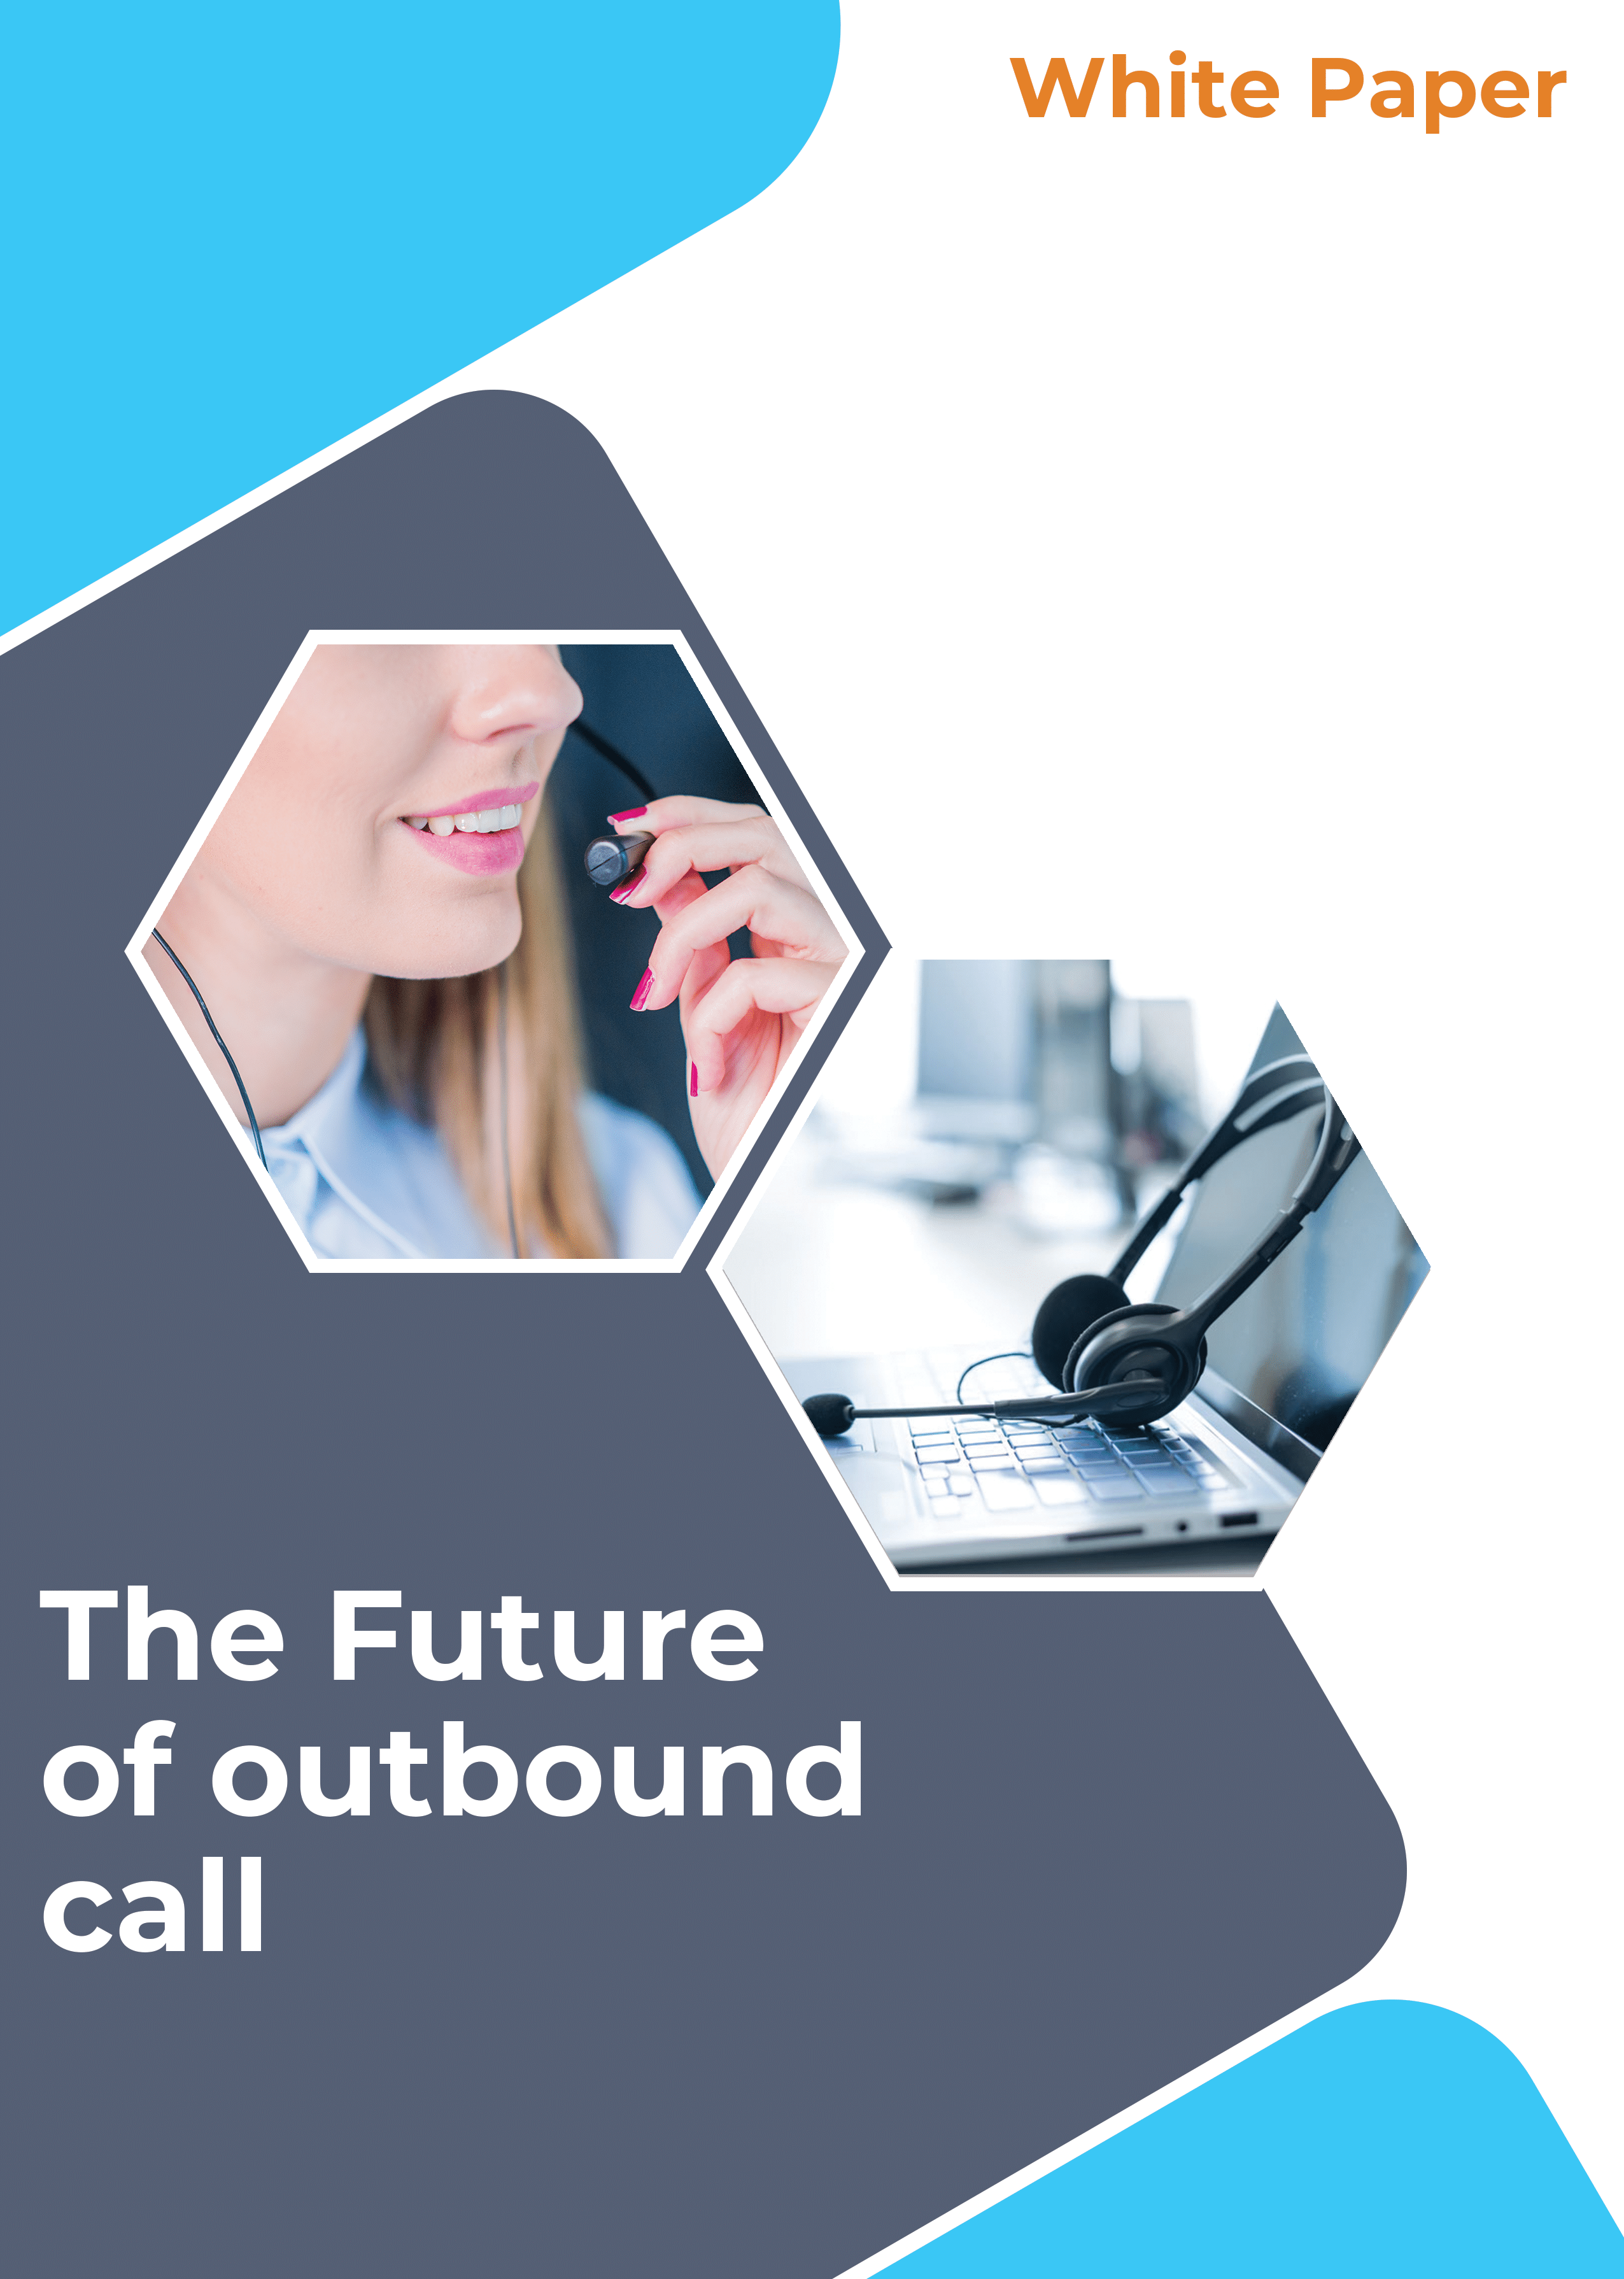 Future of outbound calls in call centers